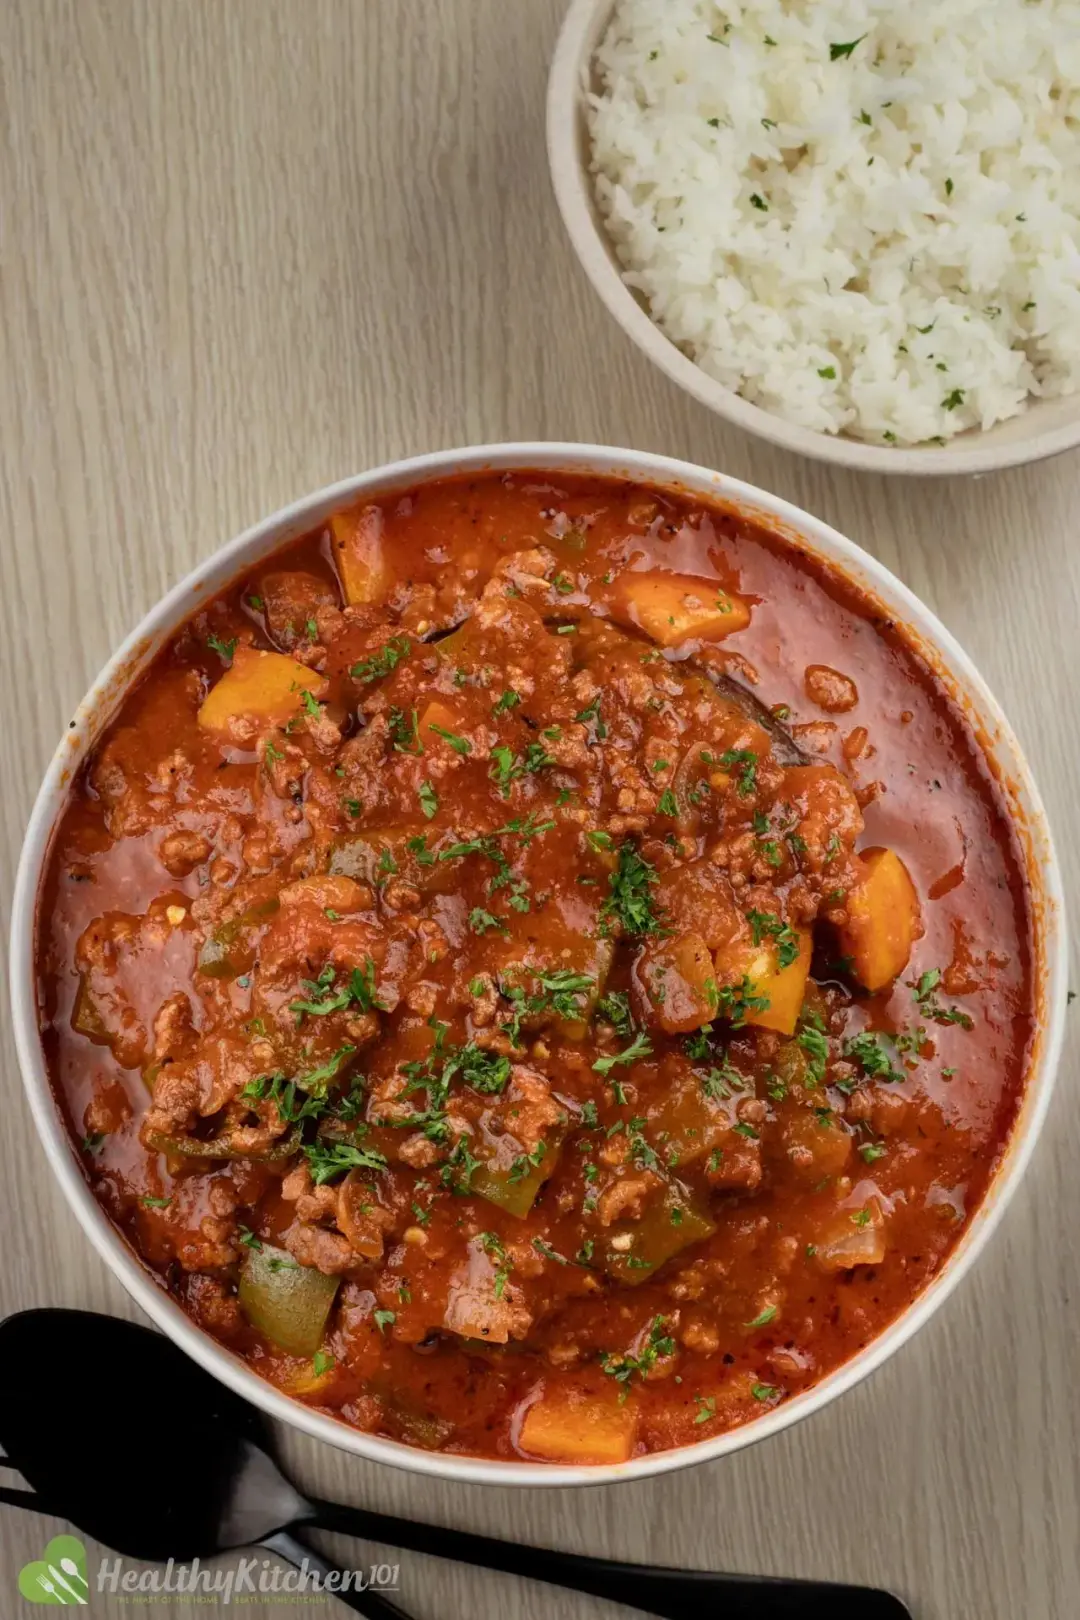 A soup bowl of sweet pepper, beef, and parsley, put next to dark utensils and cooked rice